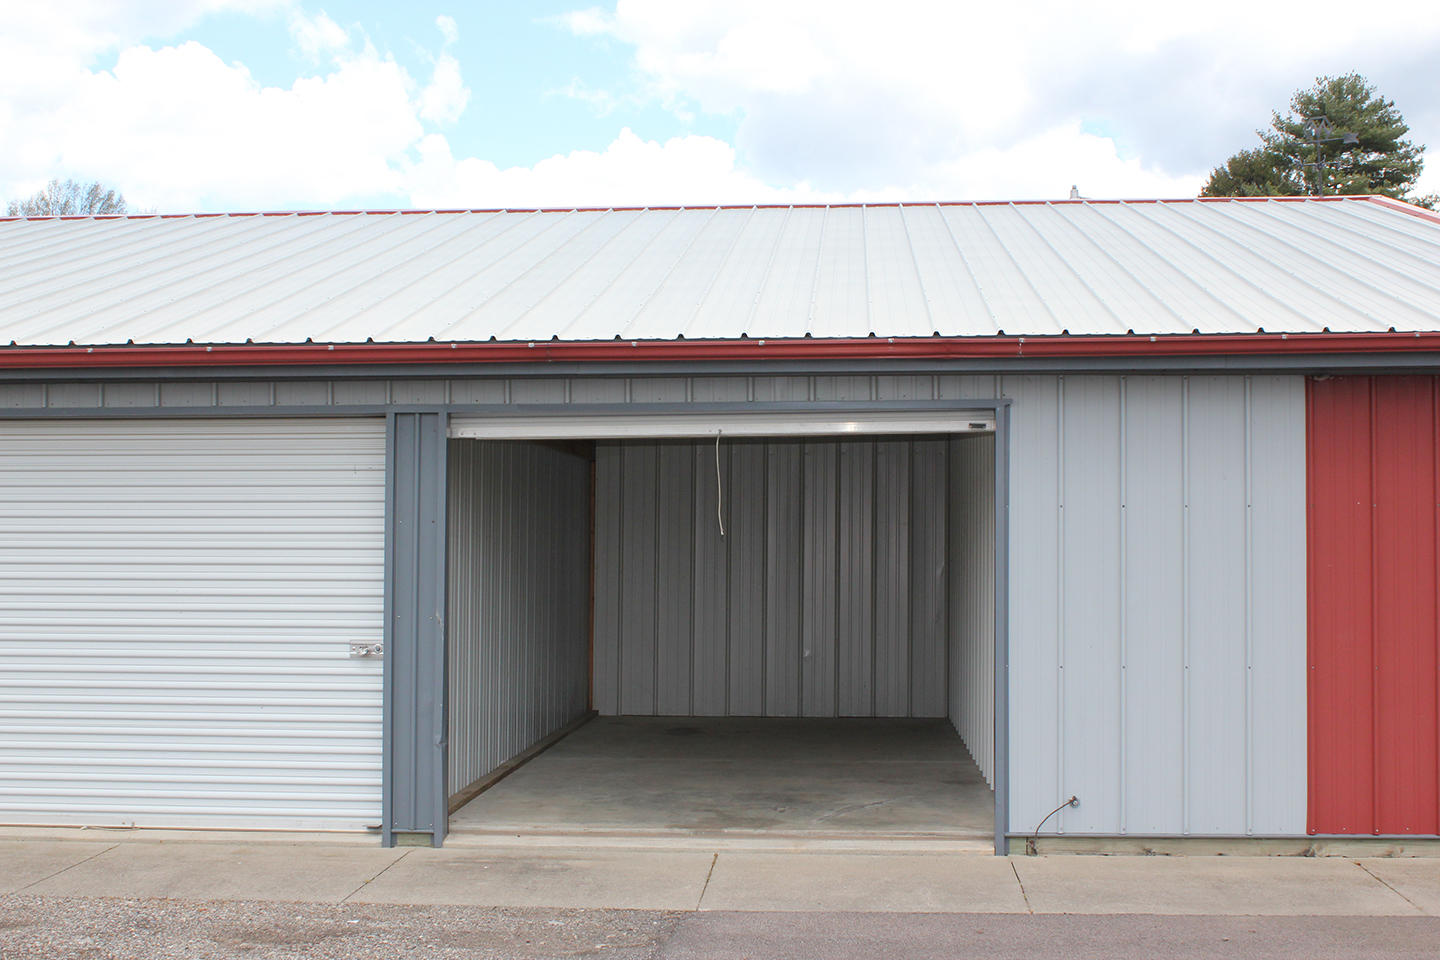 Well lit and secure, the storage units range in size from 5-by-10 feet that will store boxes, totes, appliances and small furniture to a 10-by-30-foot unit that will hold the entire contents of a four-bedroom house. For those looking to store a boat or recreational vehicle, we also have 13-by-40-foot storage space.